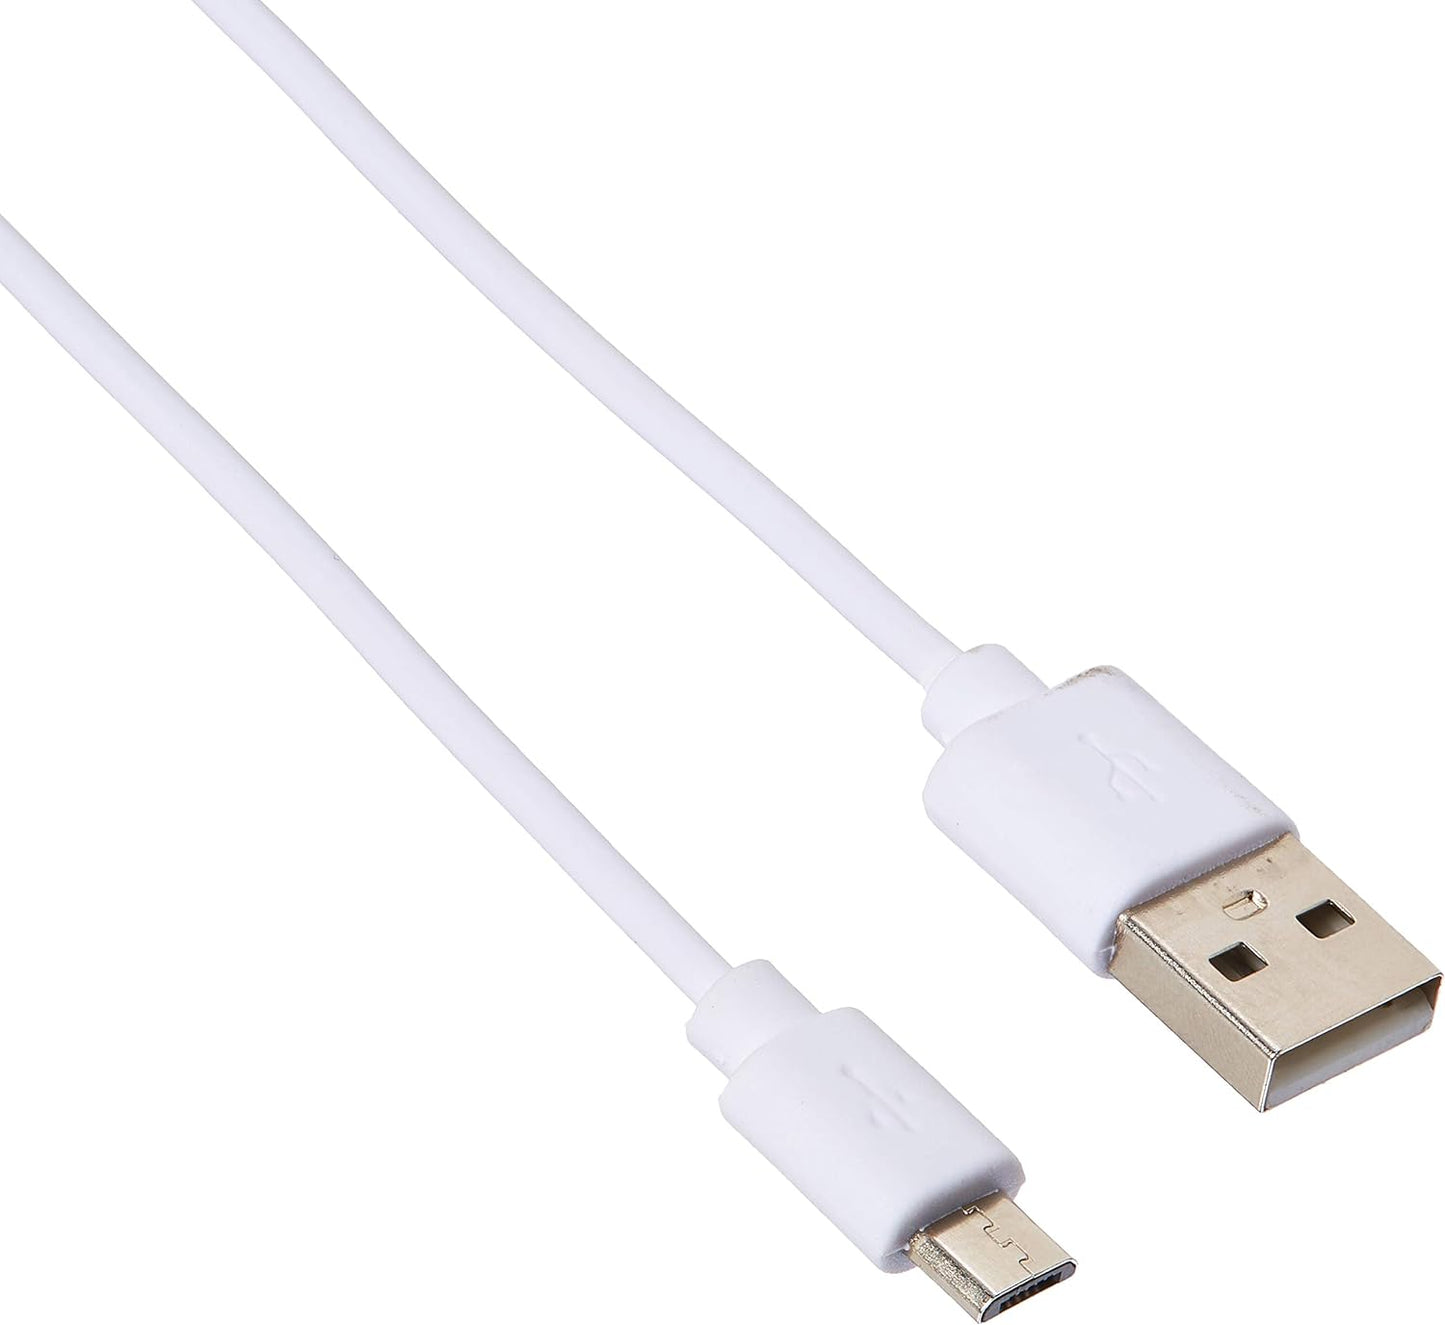 Replacement USB C cord